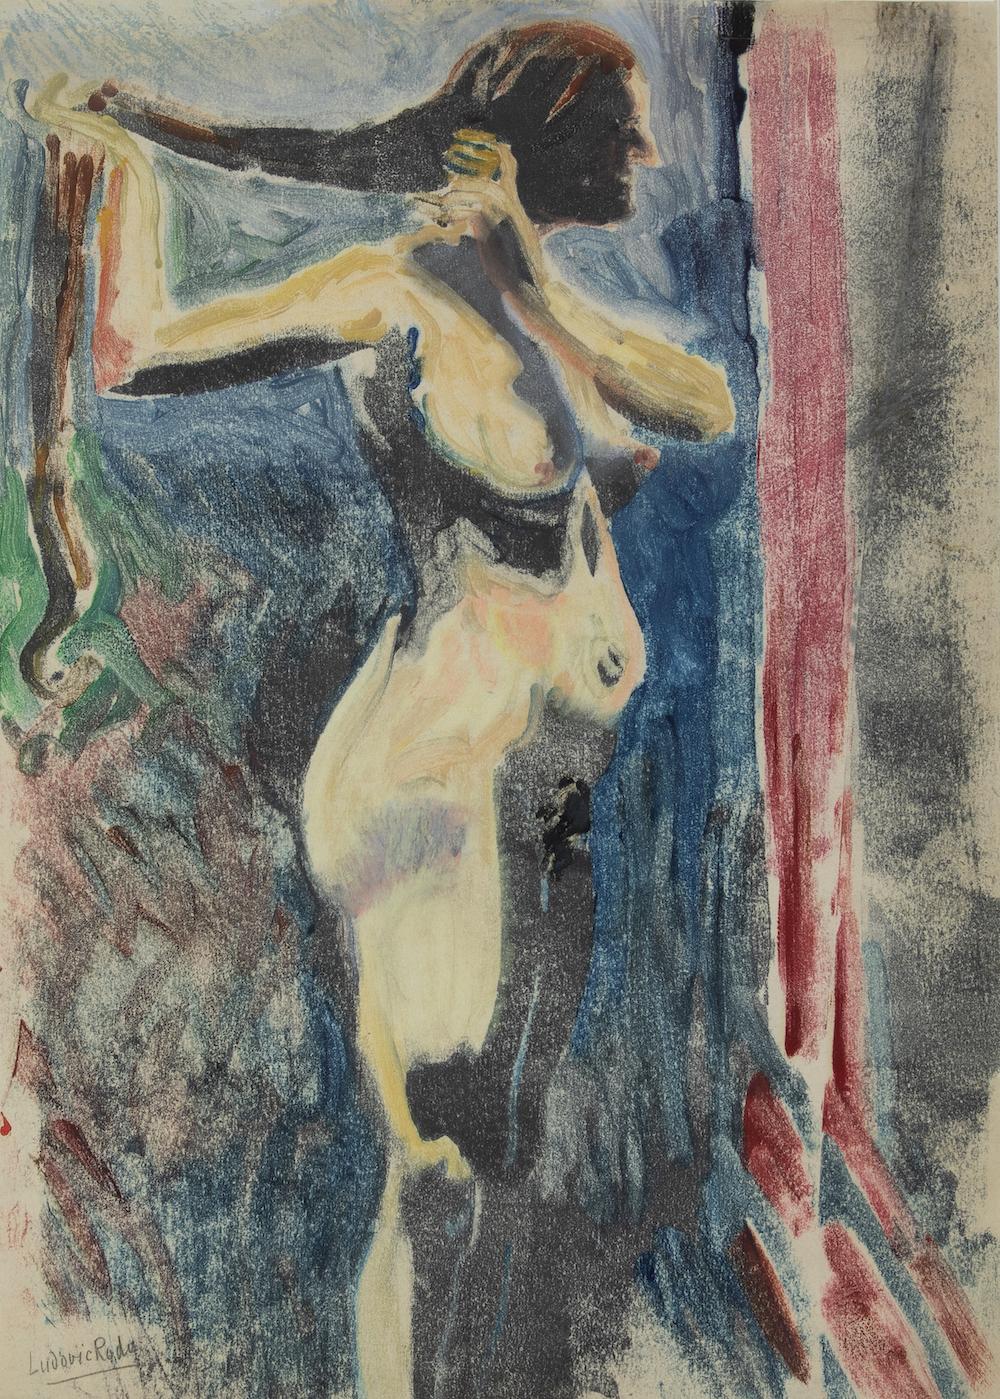 *UK BUYERS WILL PAY AN ADDITIONAL 20% VAT ON TOP OF THE ABOVE PRICE

Nude by Ludovic-Rodo Pissarro (1878-1952)
Monotype
63.5 x 46 cm (25 x 18 ⅛ inches)
Signed lower left, Ludovic Rodo

Female nudes are often considered amongst the most collectible